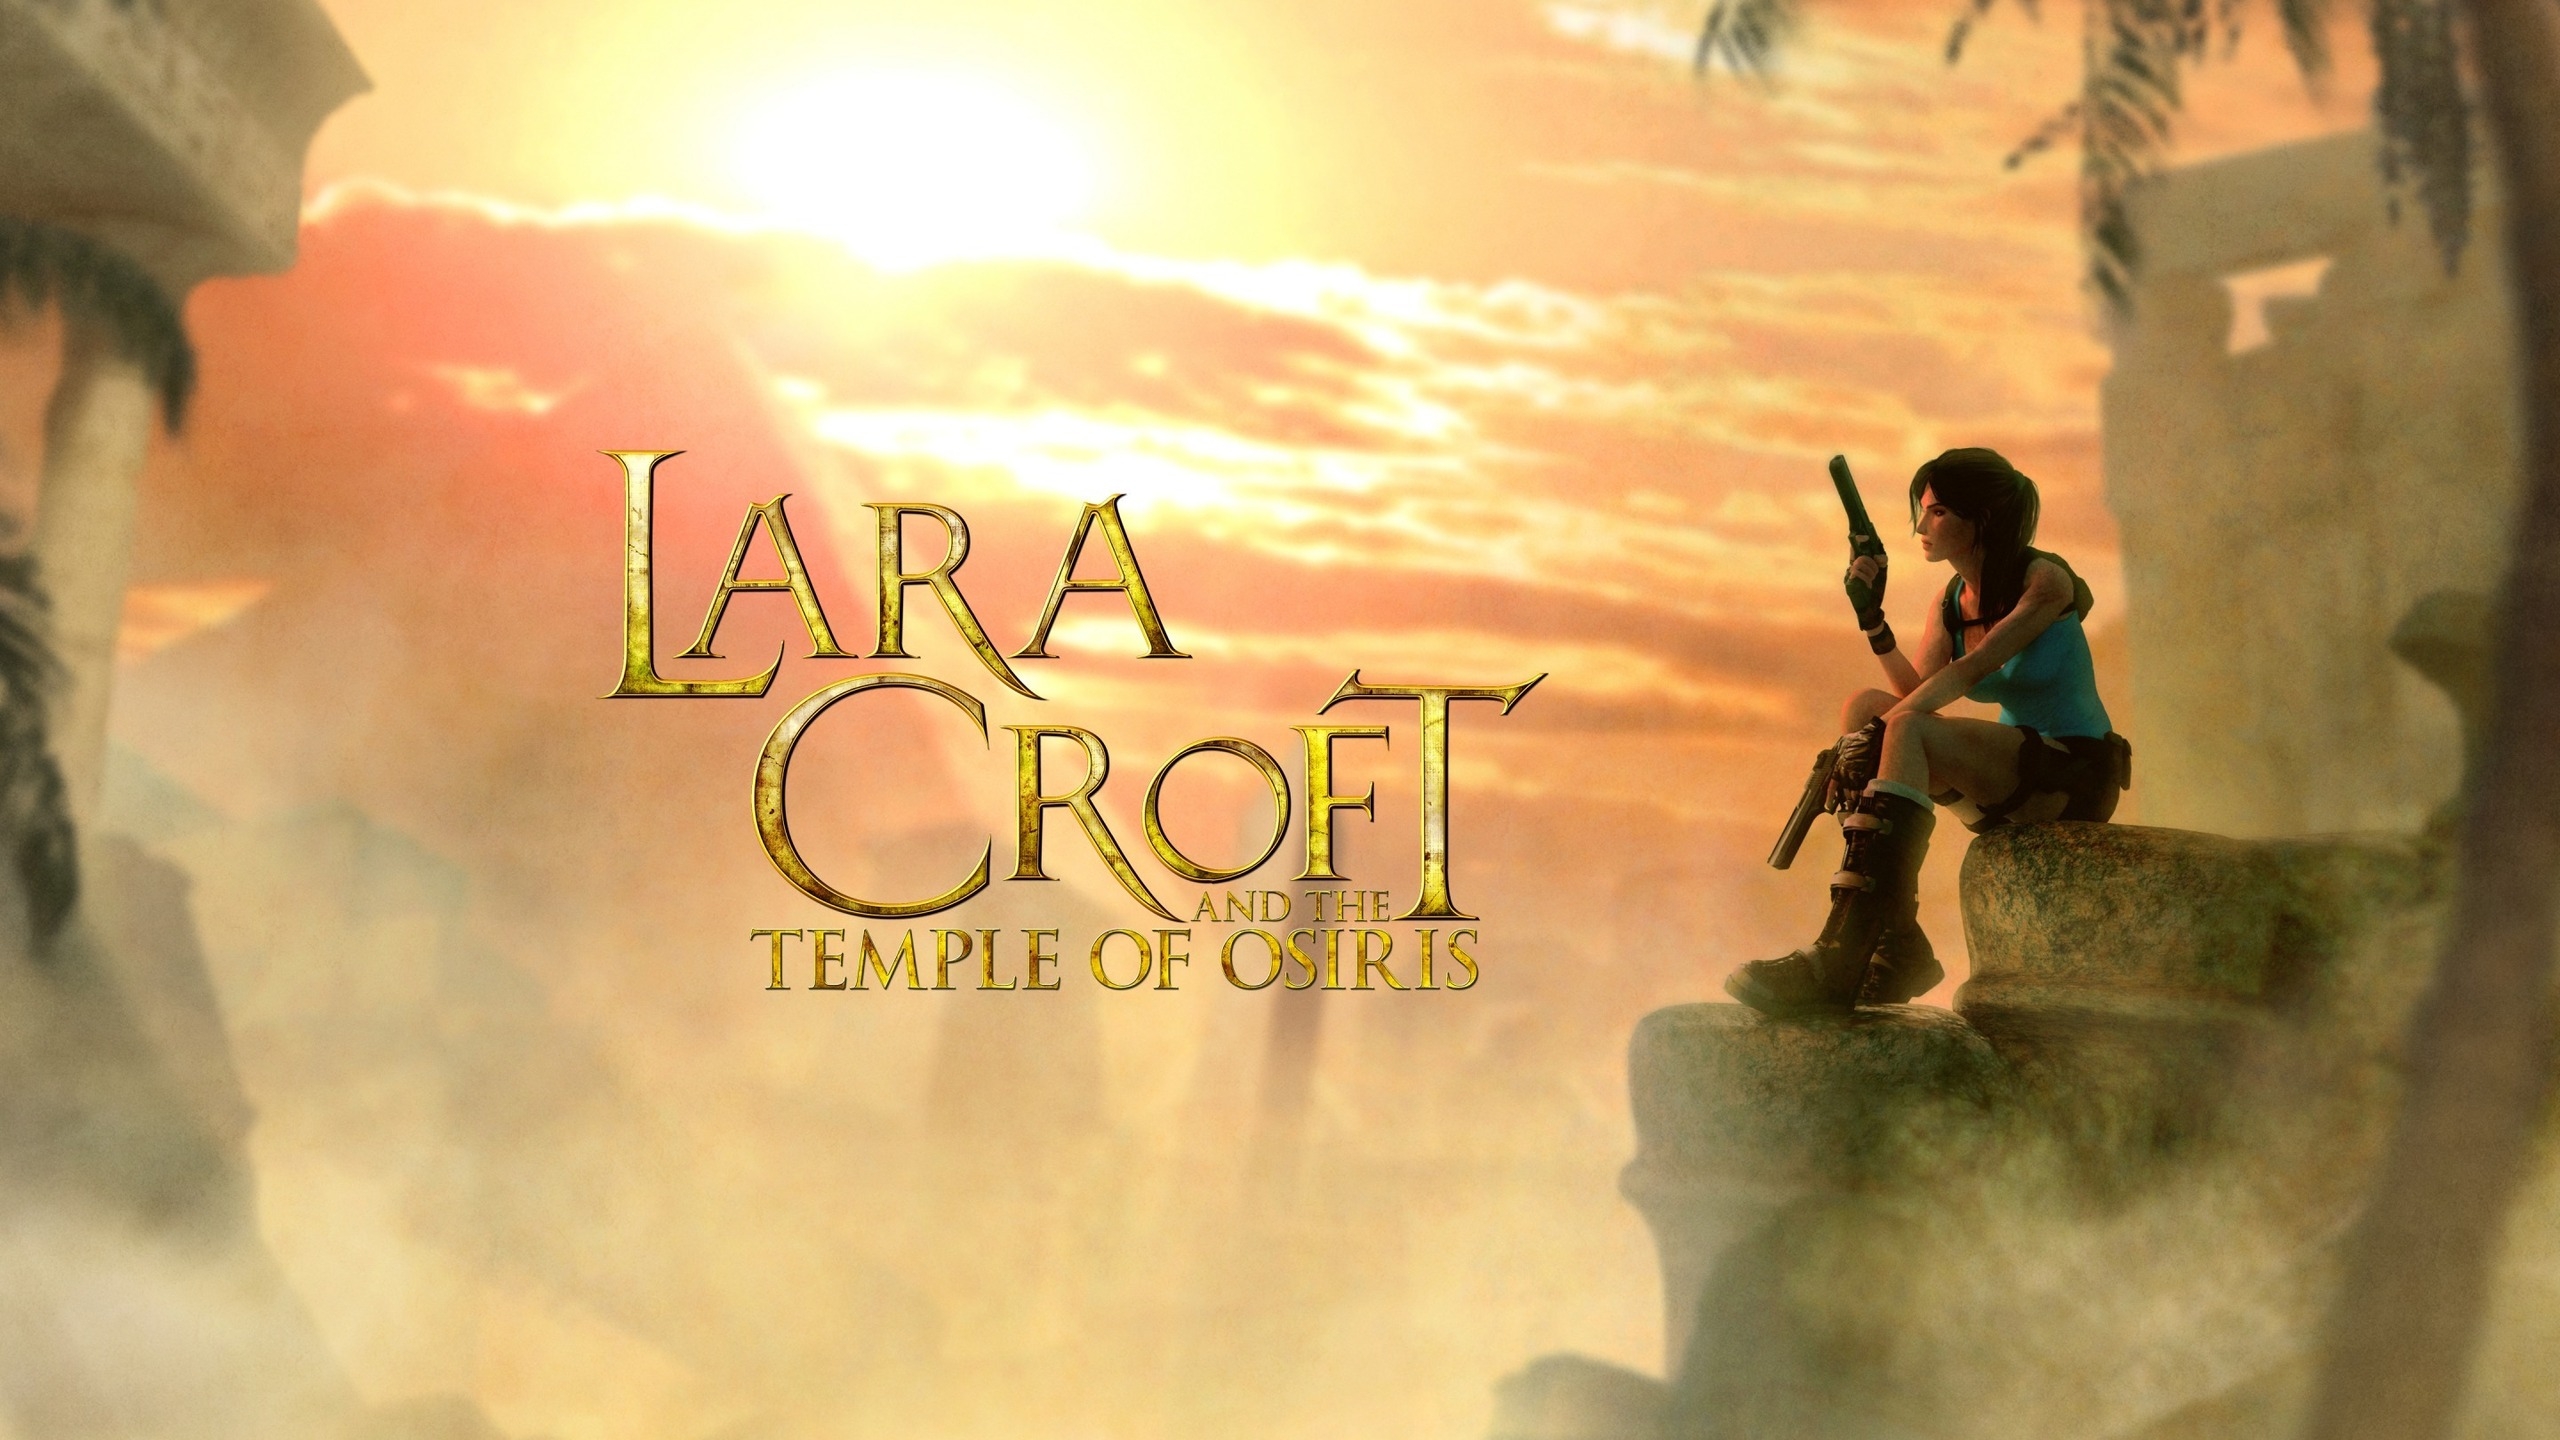 Lara Croft and the Temple Of Osiris for 2560x1440 HDTV resolution